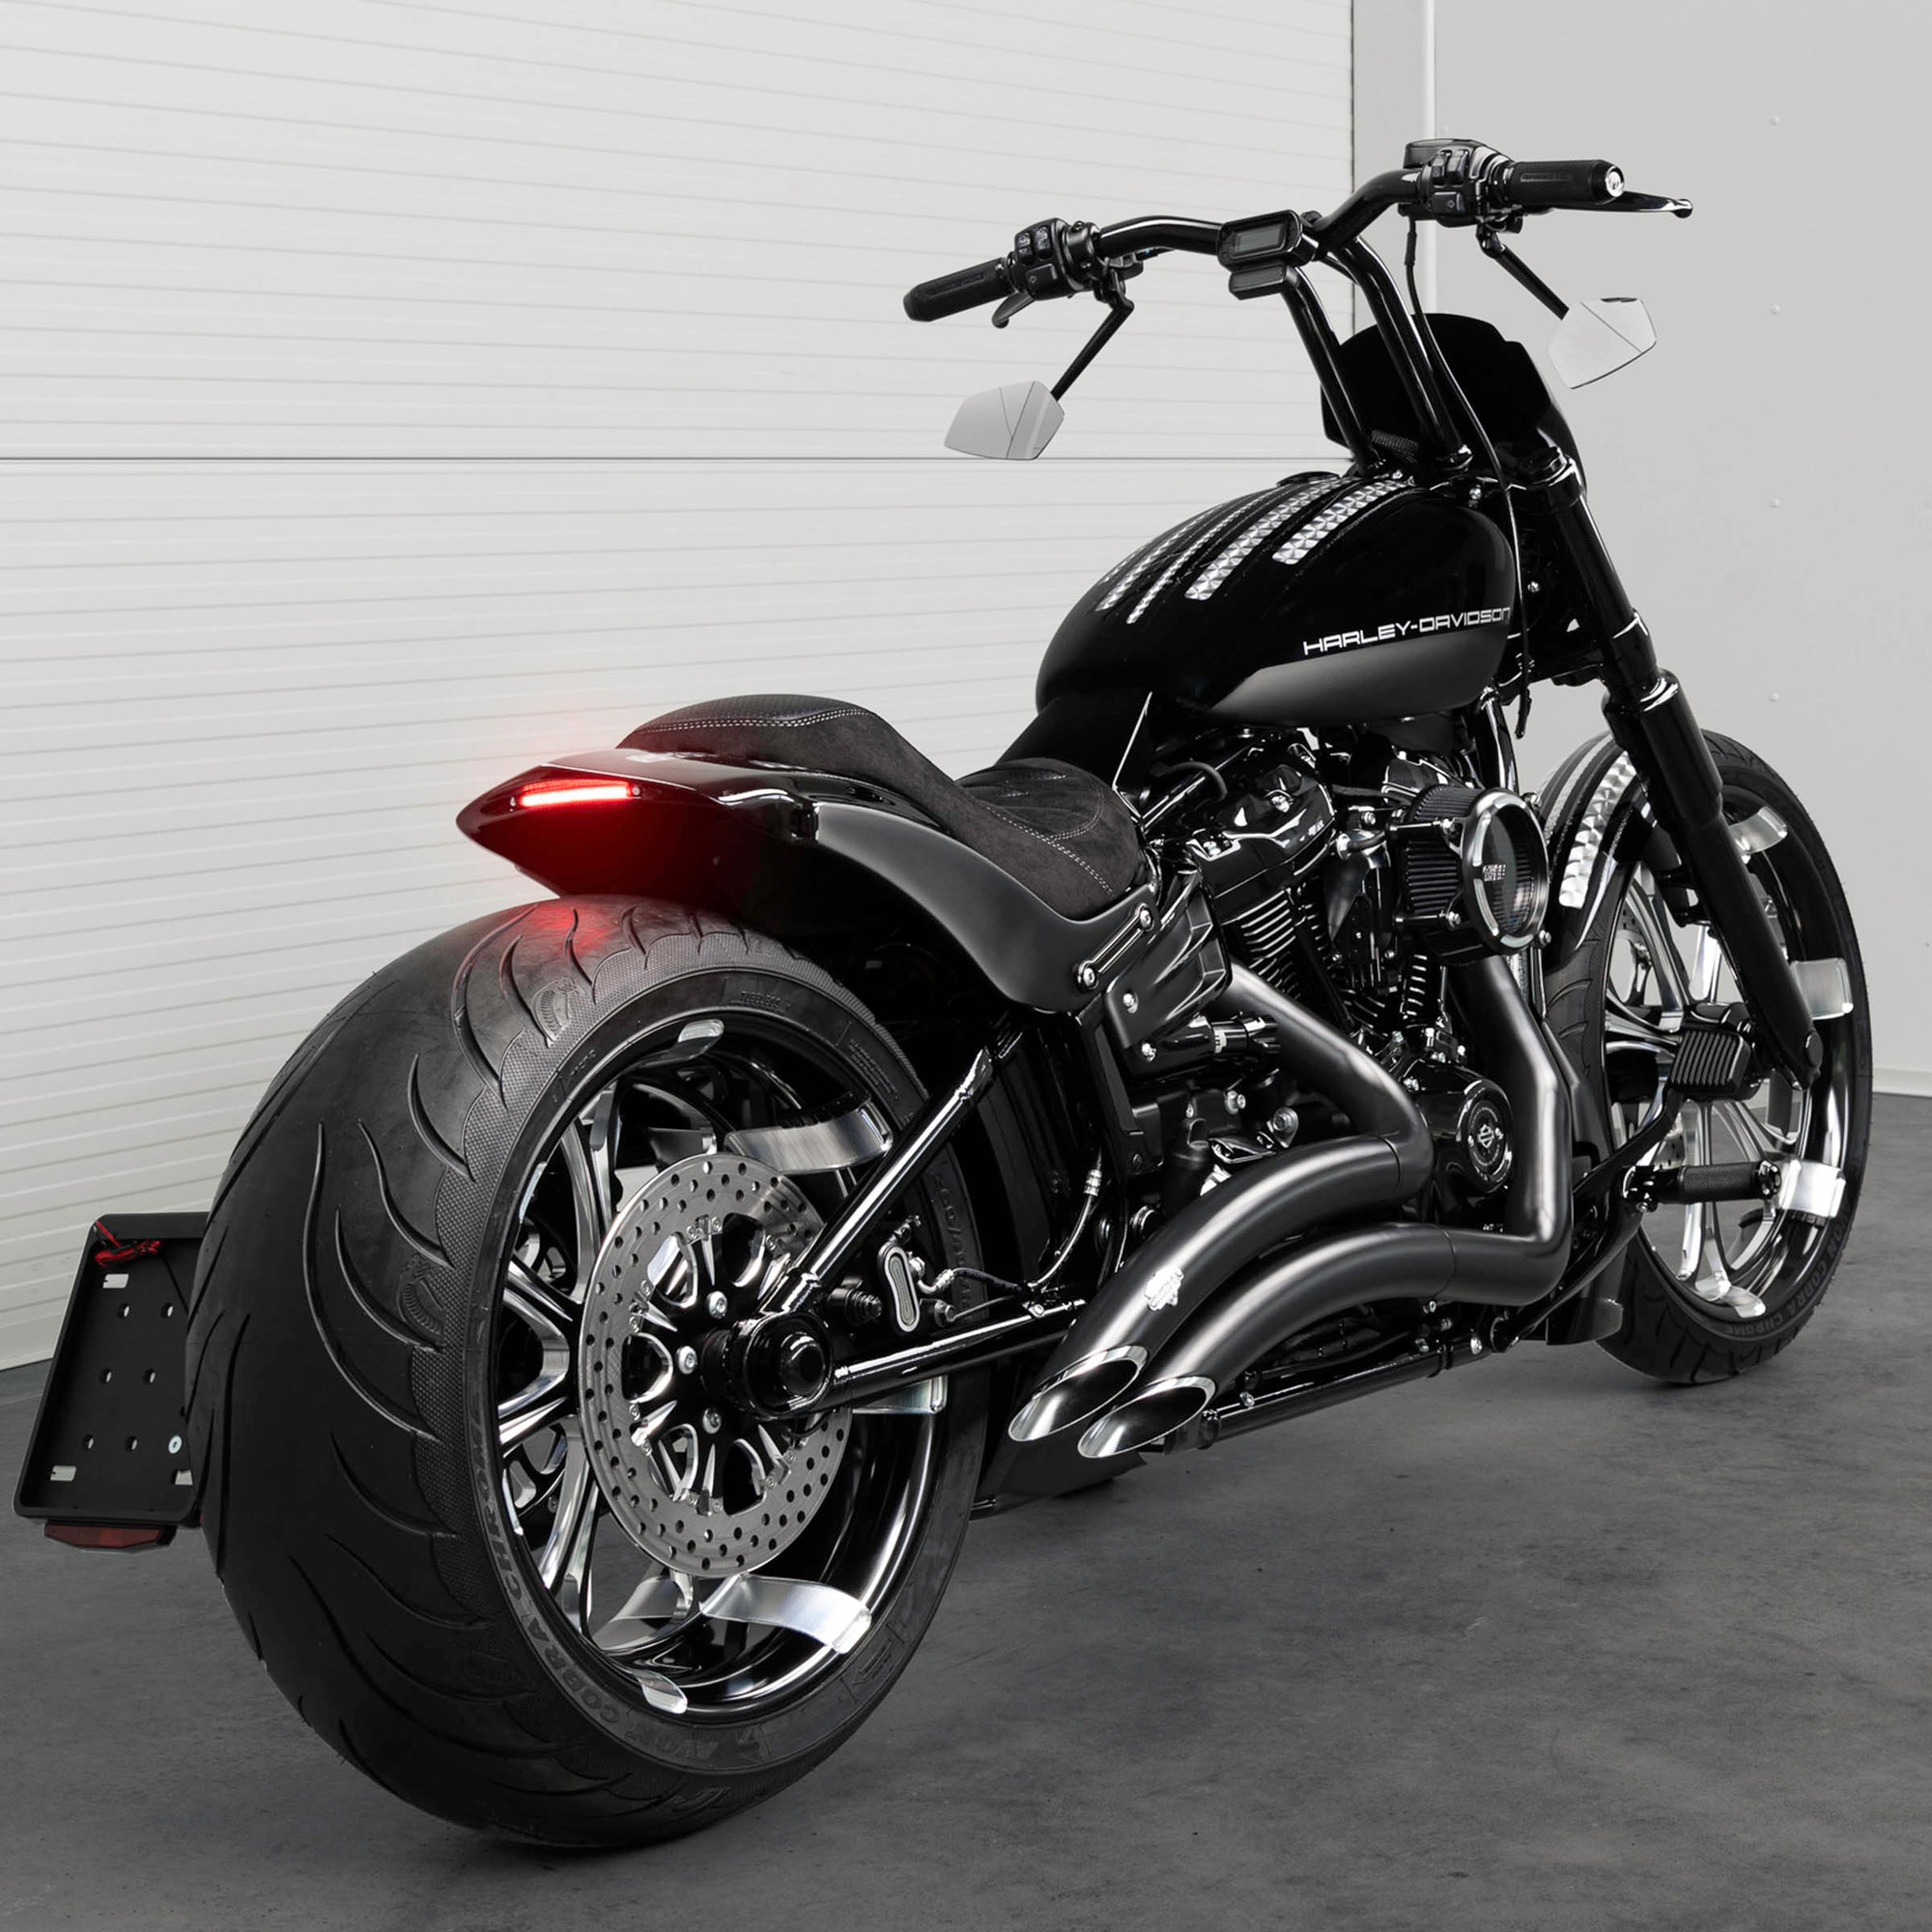 Modified Harley Davidson Breakout motorcycle with Killer Custom parts from the rear in a white modern bike shop